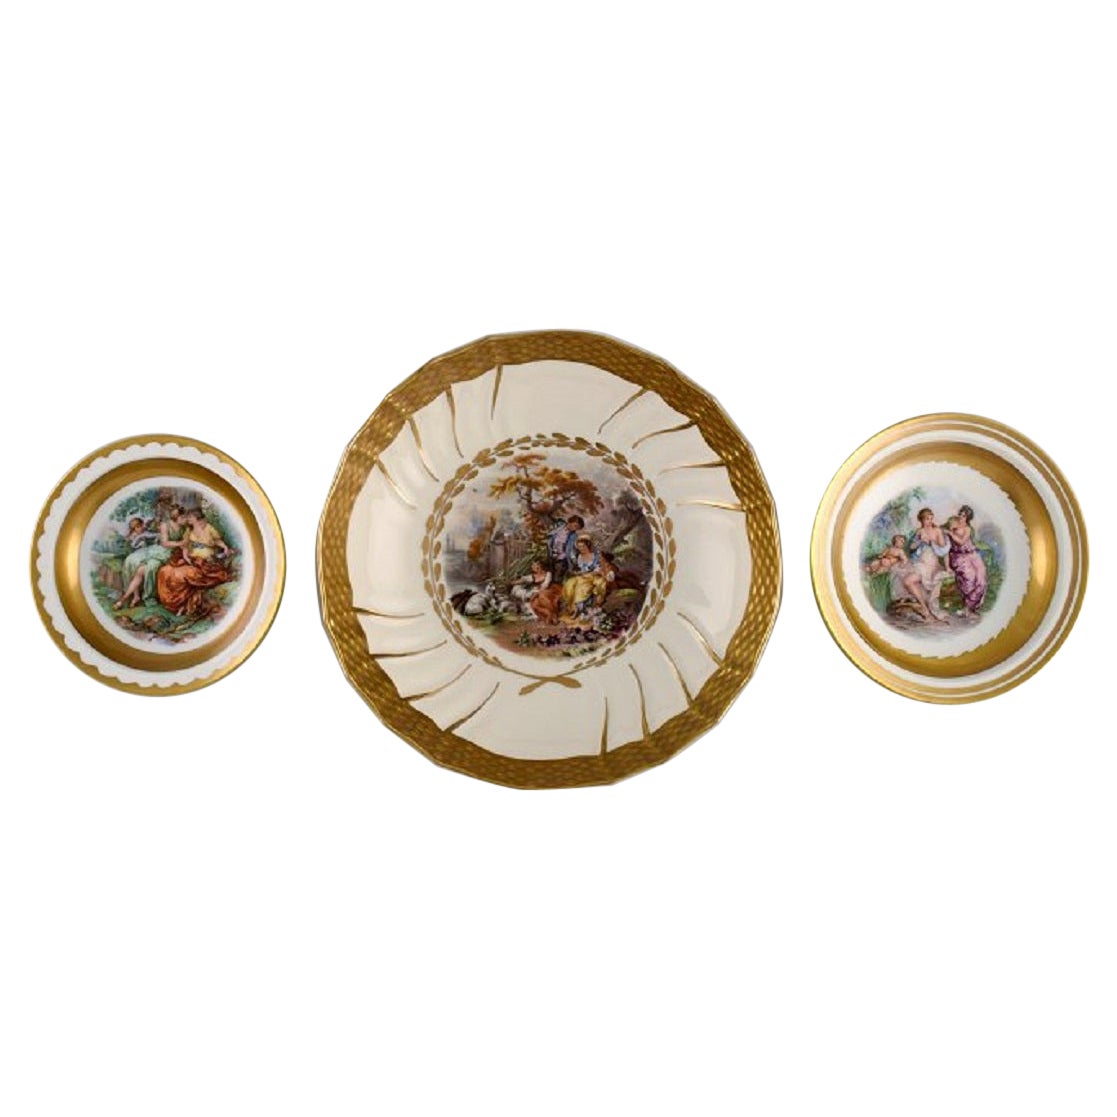 Three Royal Copenhagen bowls decorated with flowers and romantic scenery. 